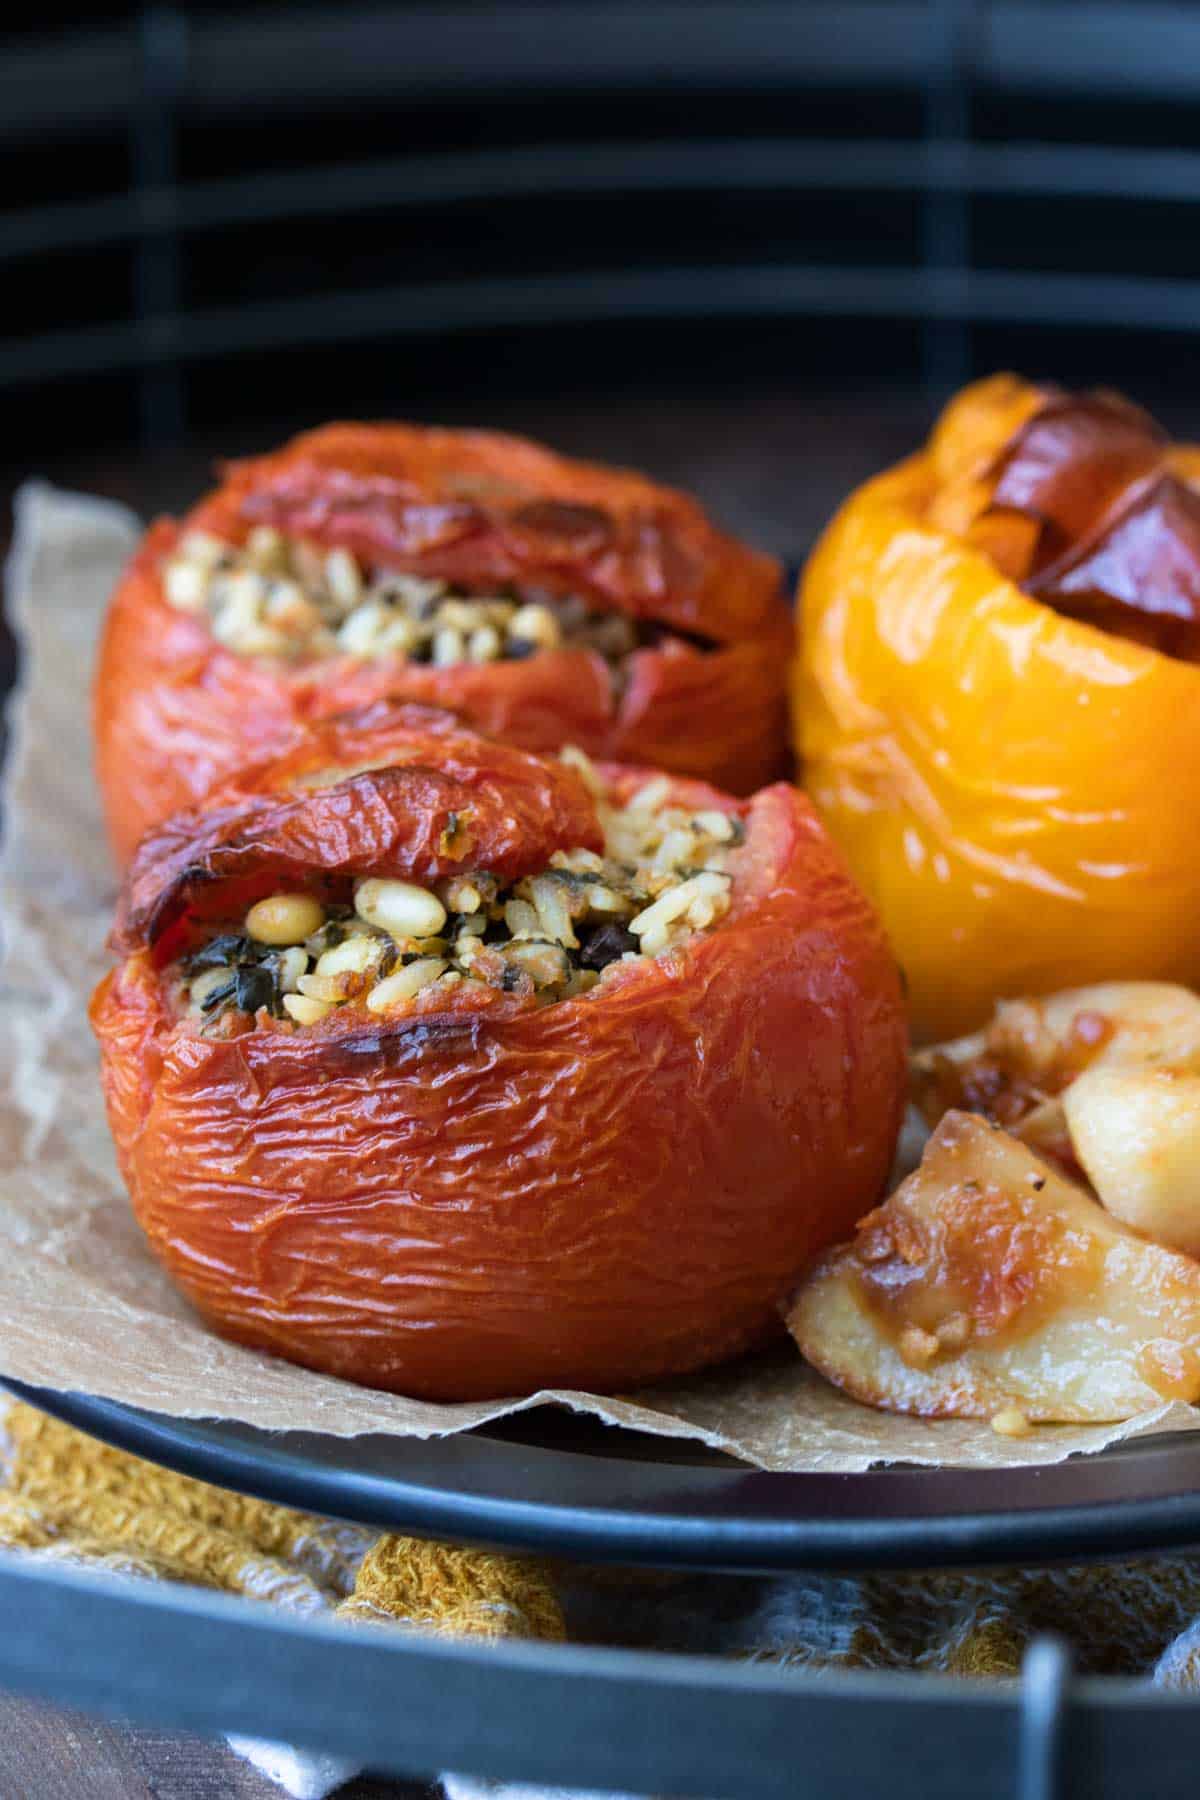 Tomatoes and peppers stuffed with rice mixture next to pieces of potato